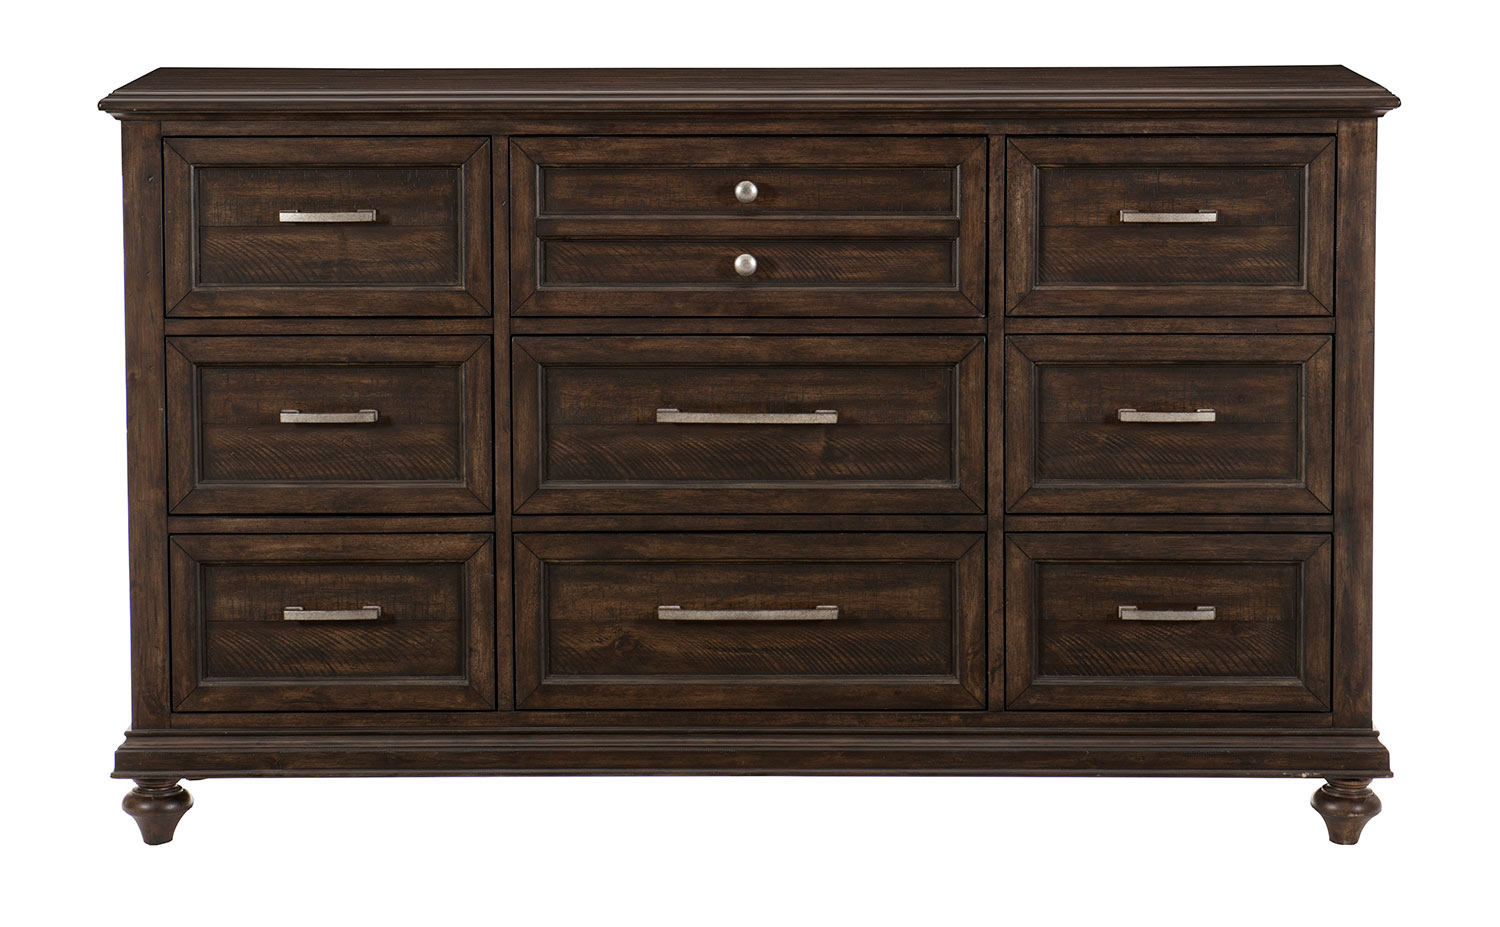 Homelegance Cardano Dresser - Driftwood Charcoal over Acacia Solids and Veneers